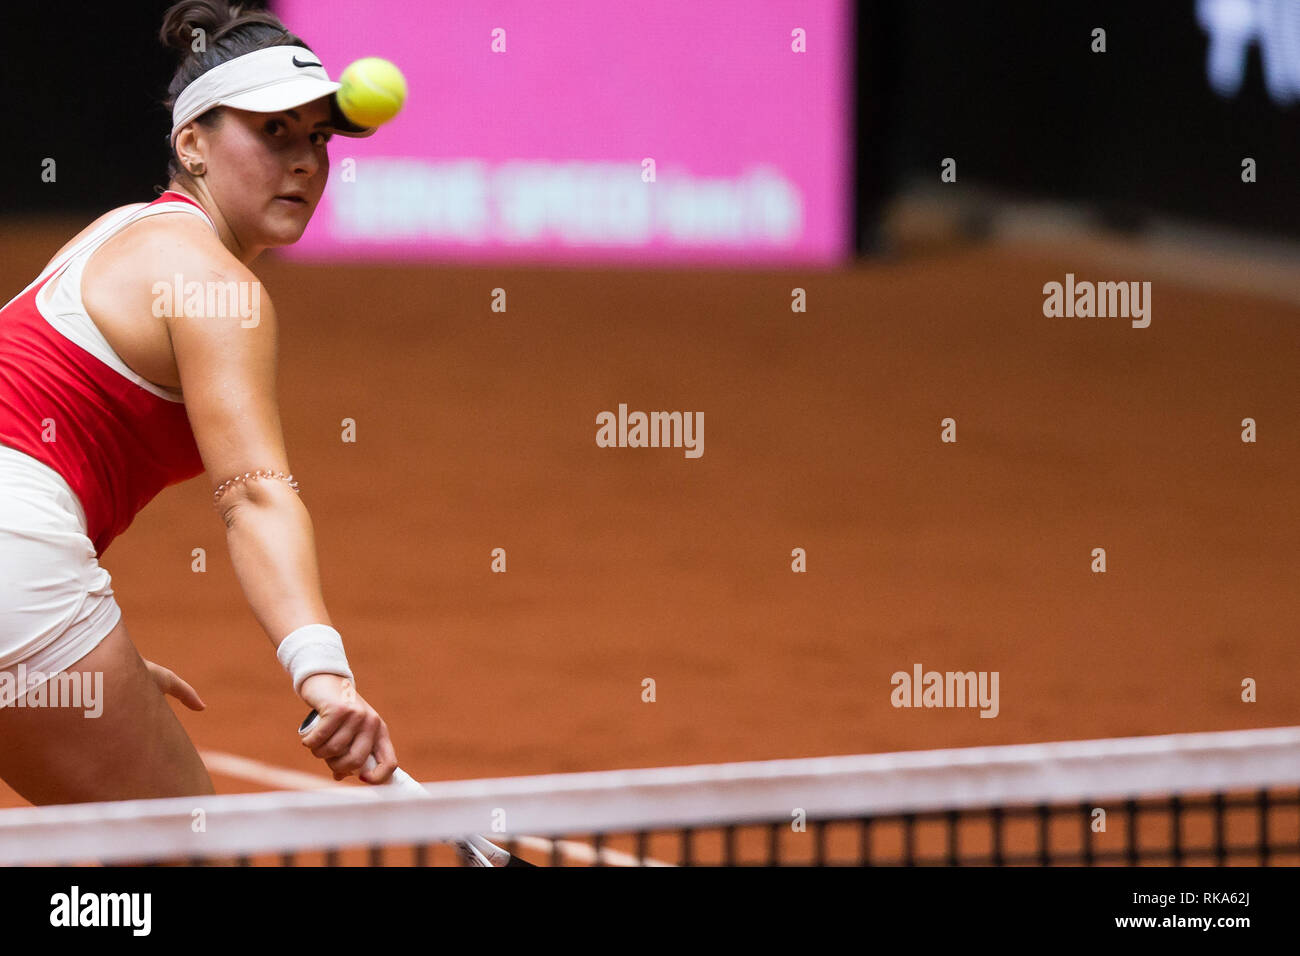 9 february 2019 Den Bosch, Netherlands Tennis, FED Cup Netherlands v Canada   Bianca Andreescu (Canada) Credit: Orange Pictures vof/Alamy Live News Stock Photo